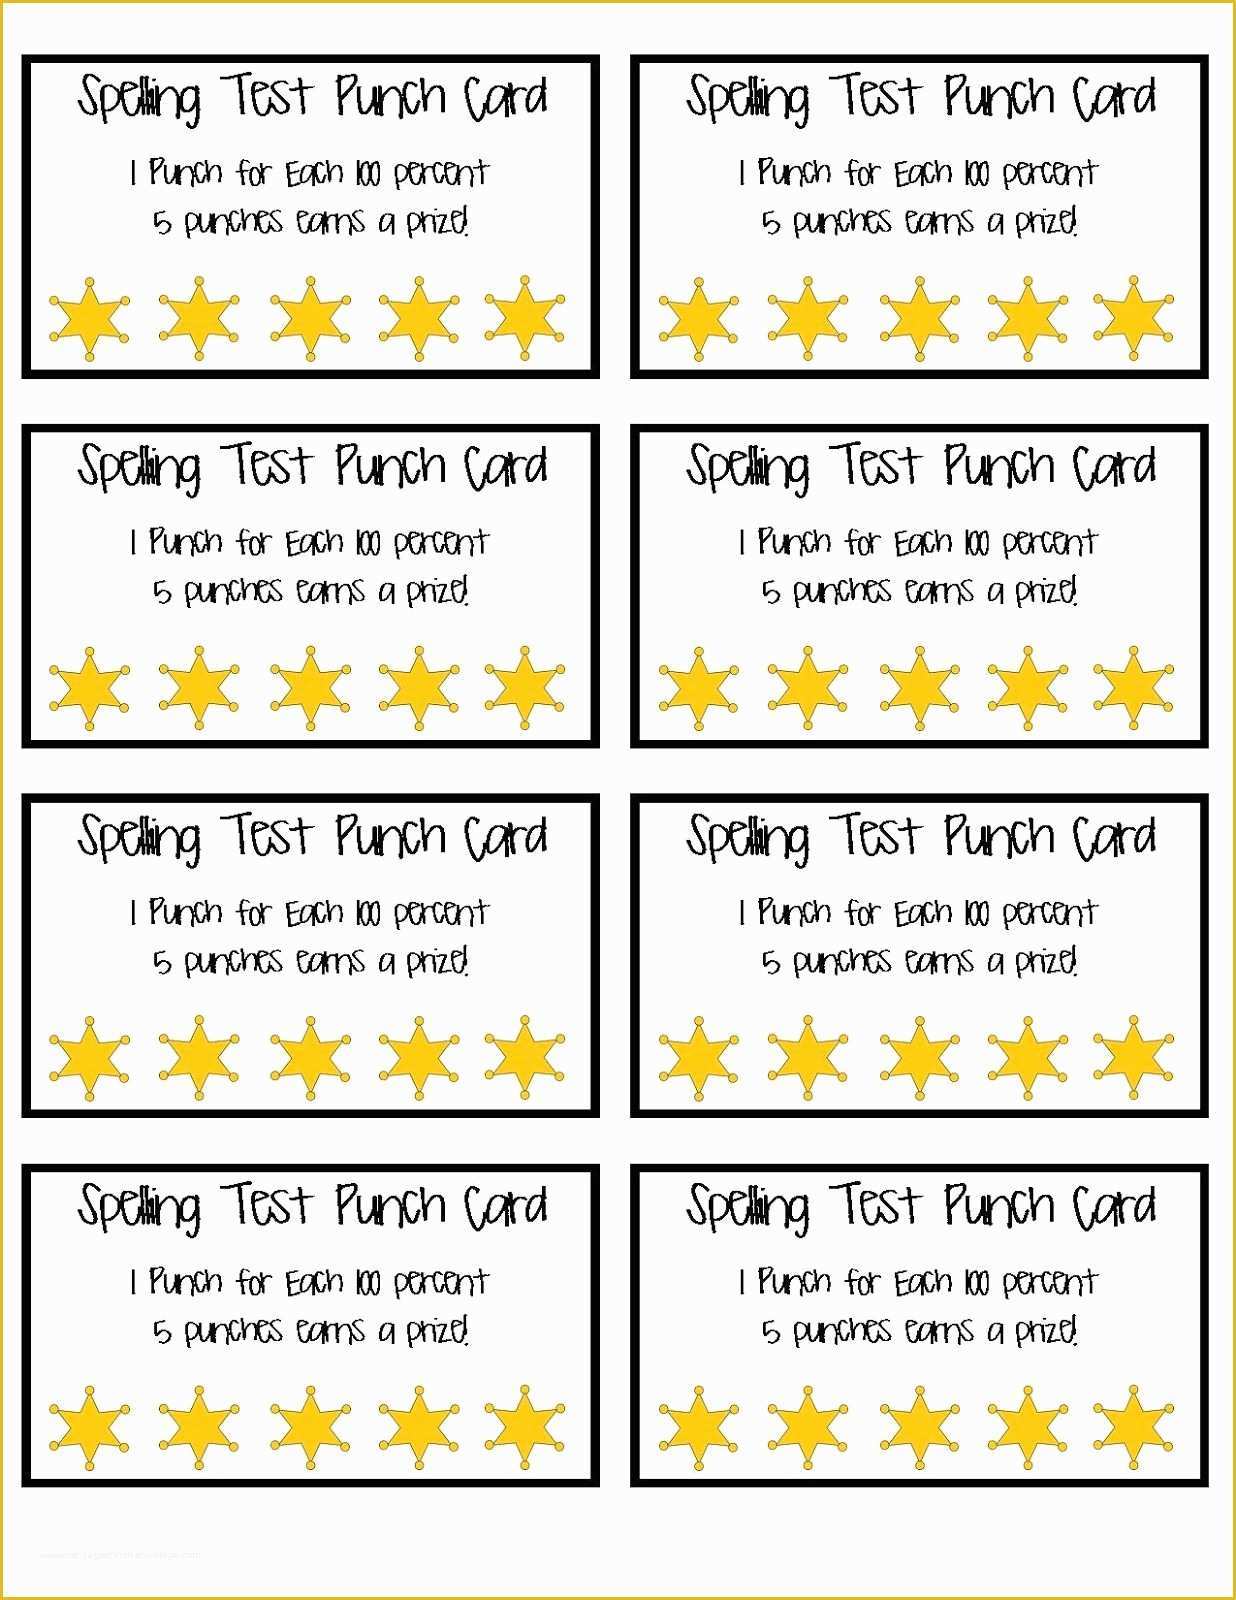 free-printable-punch-card-template-of-spelling-test-punch-cards-part-of-a-set-of-8